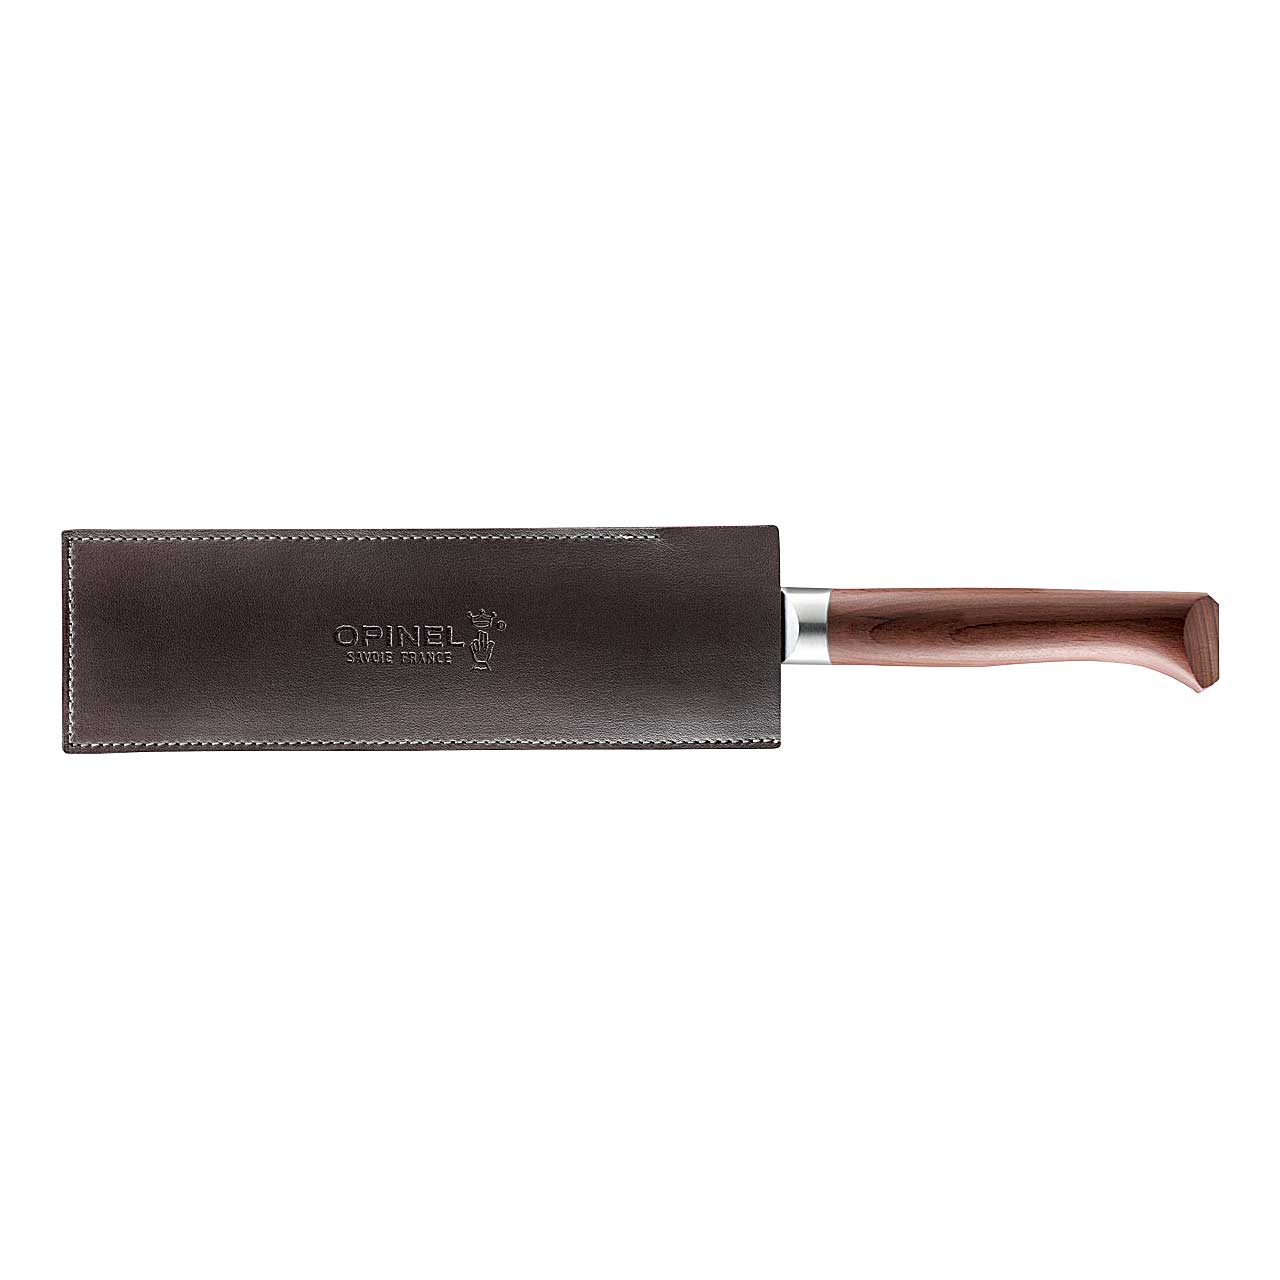 Opinel FORGES 1890, Brotmesser 21 cm - 254548